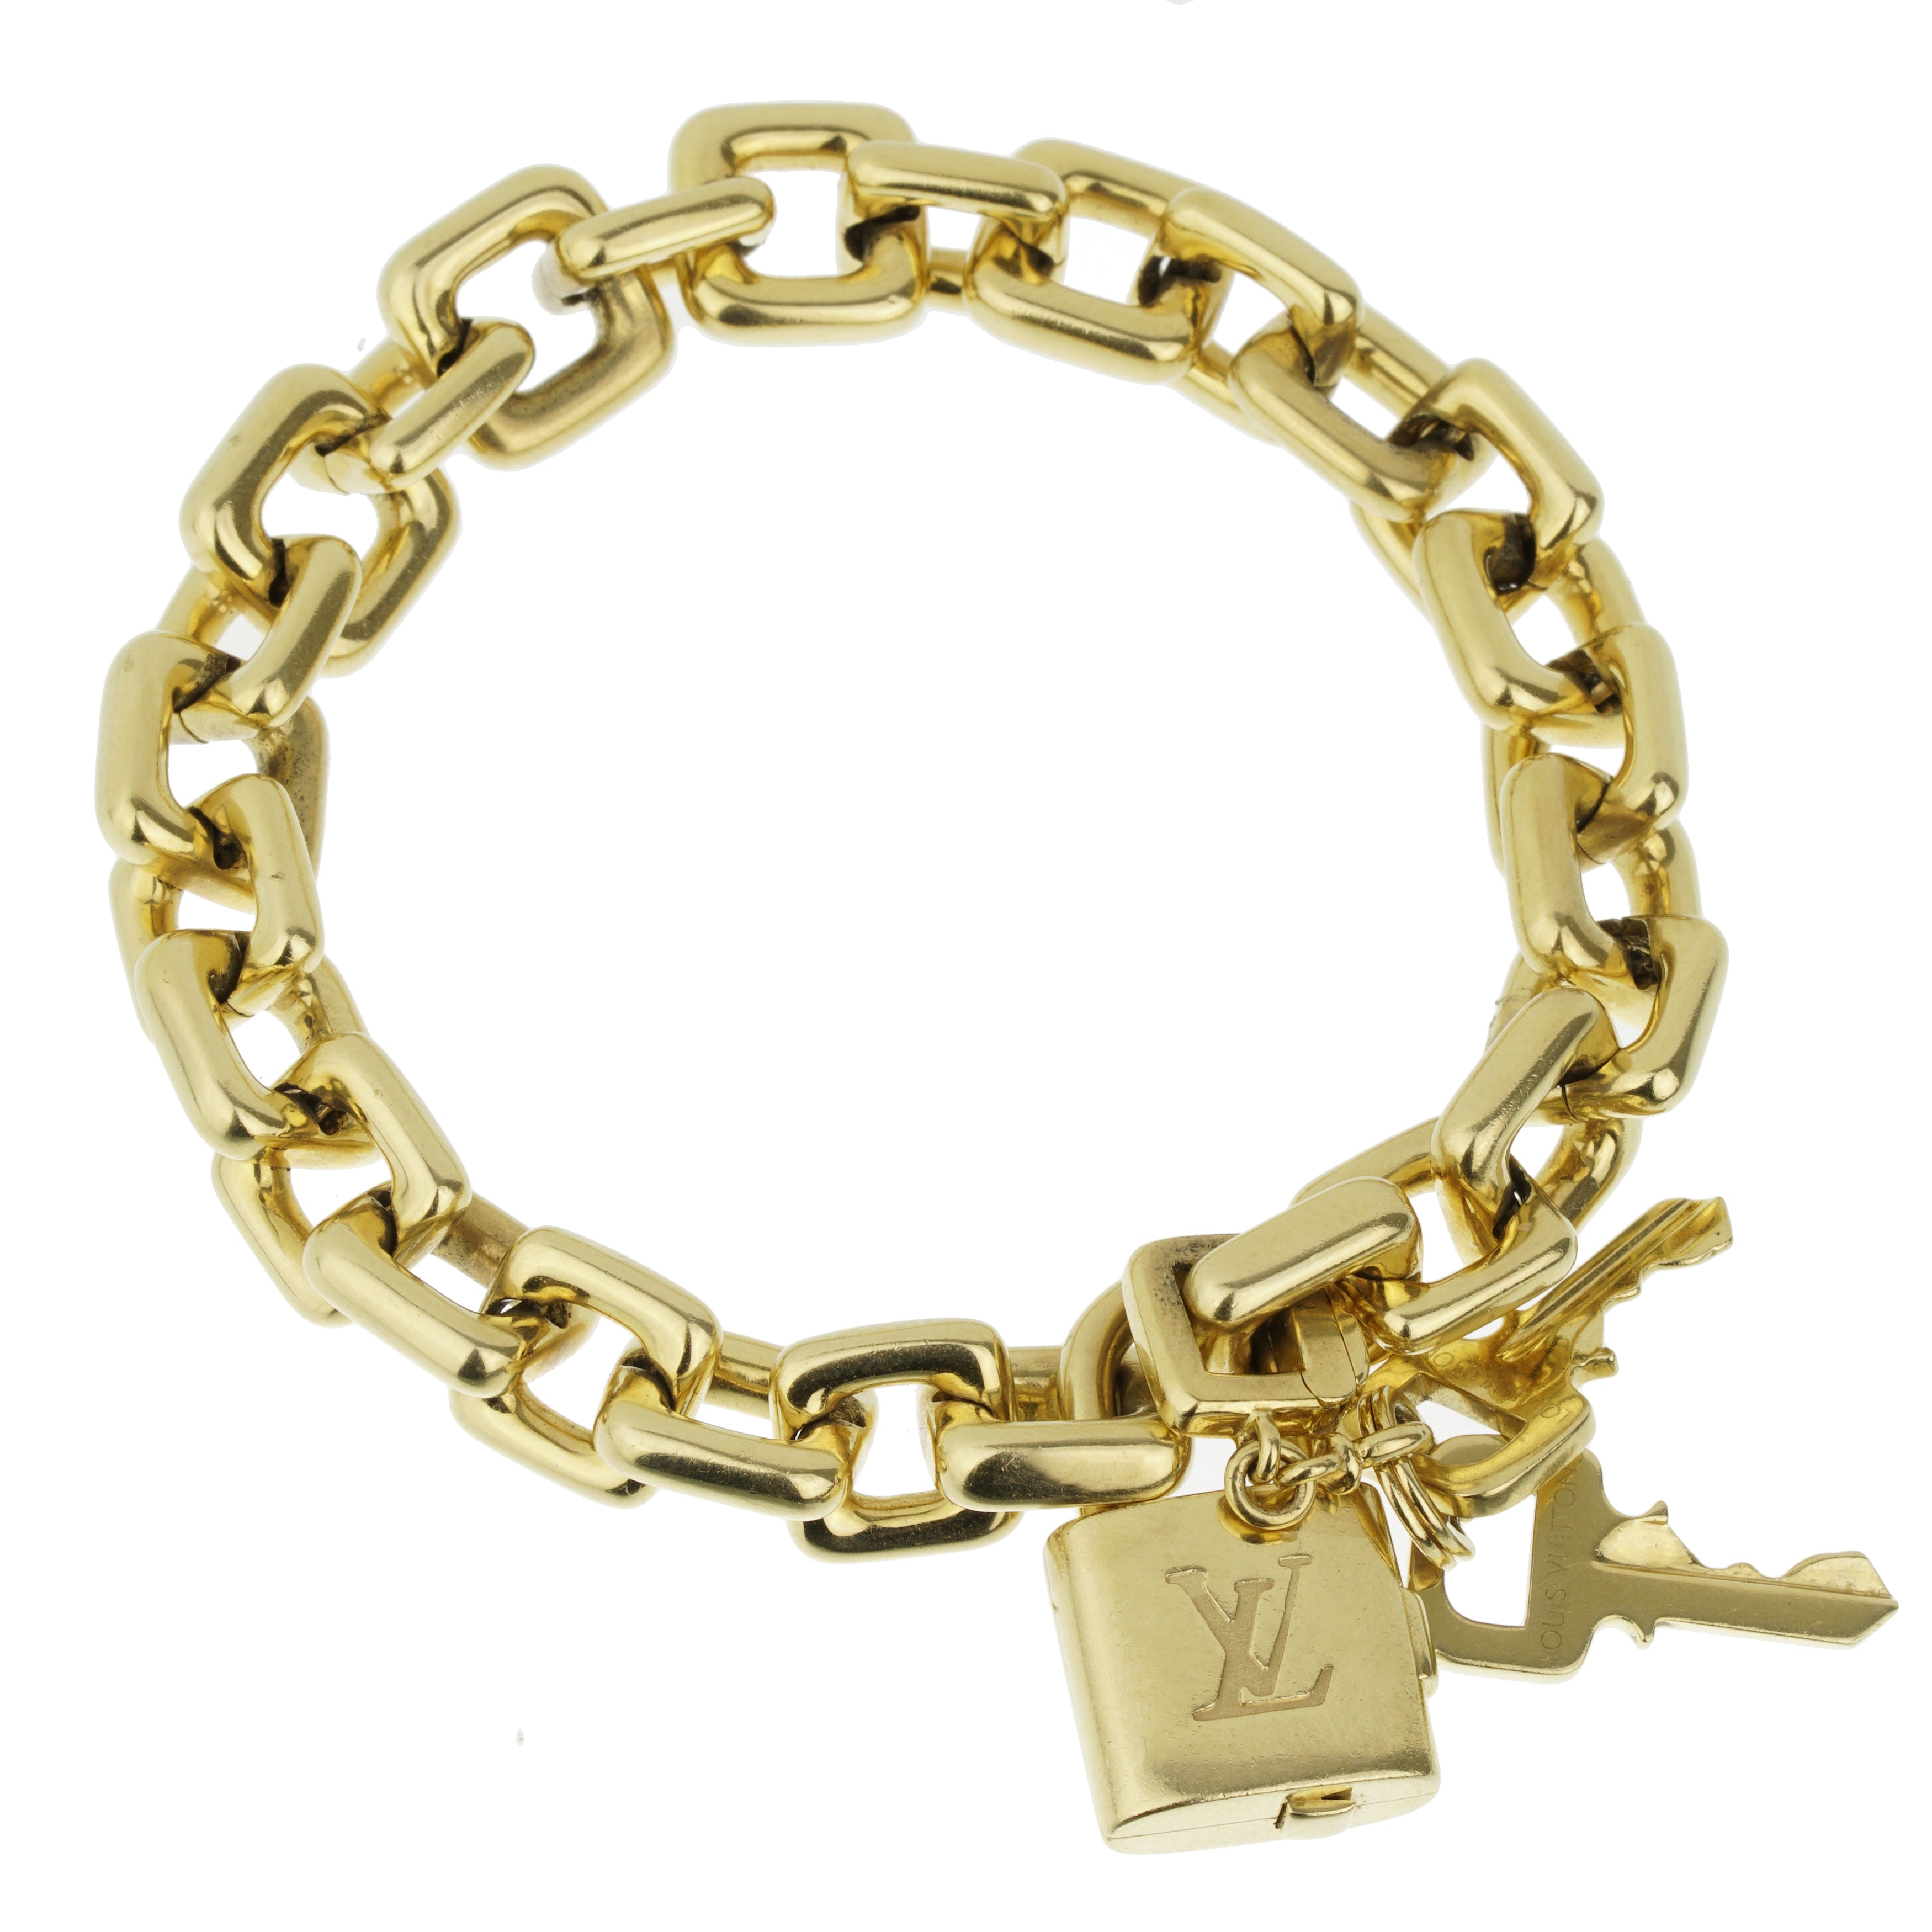 MAGNIFICENT LOUIS VUITTON 18K GOLD CHARM LUGGAGE BRACELET "7  CHARMS" WITH BOX